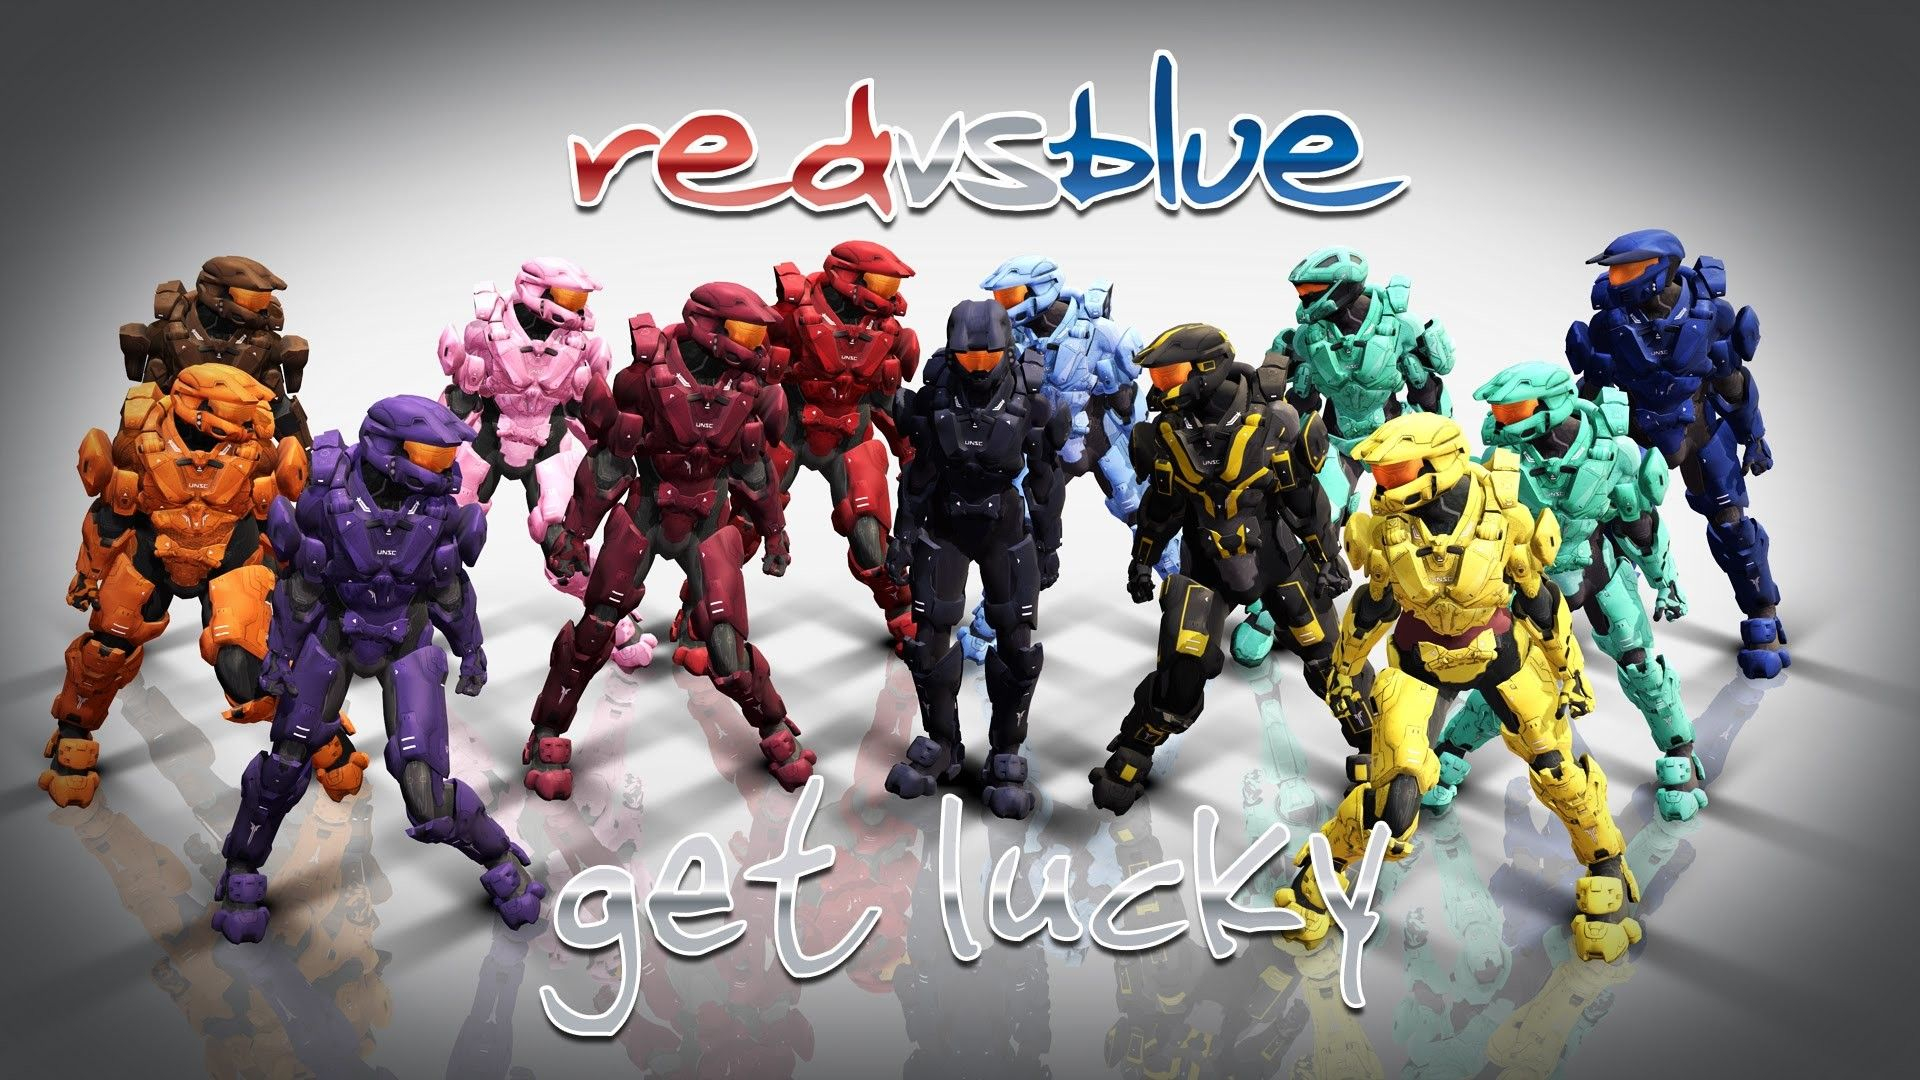 1920x1080 Red vs. Blue Wallpapers Top Free Red vs. Blue Backgrounds